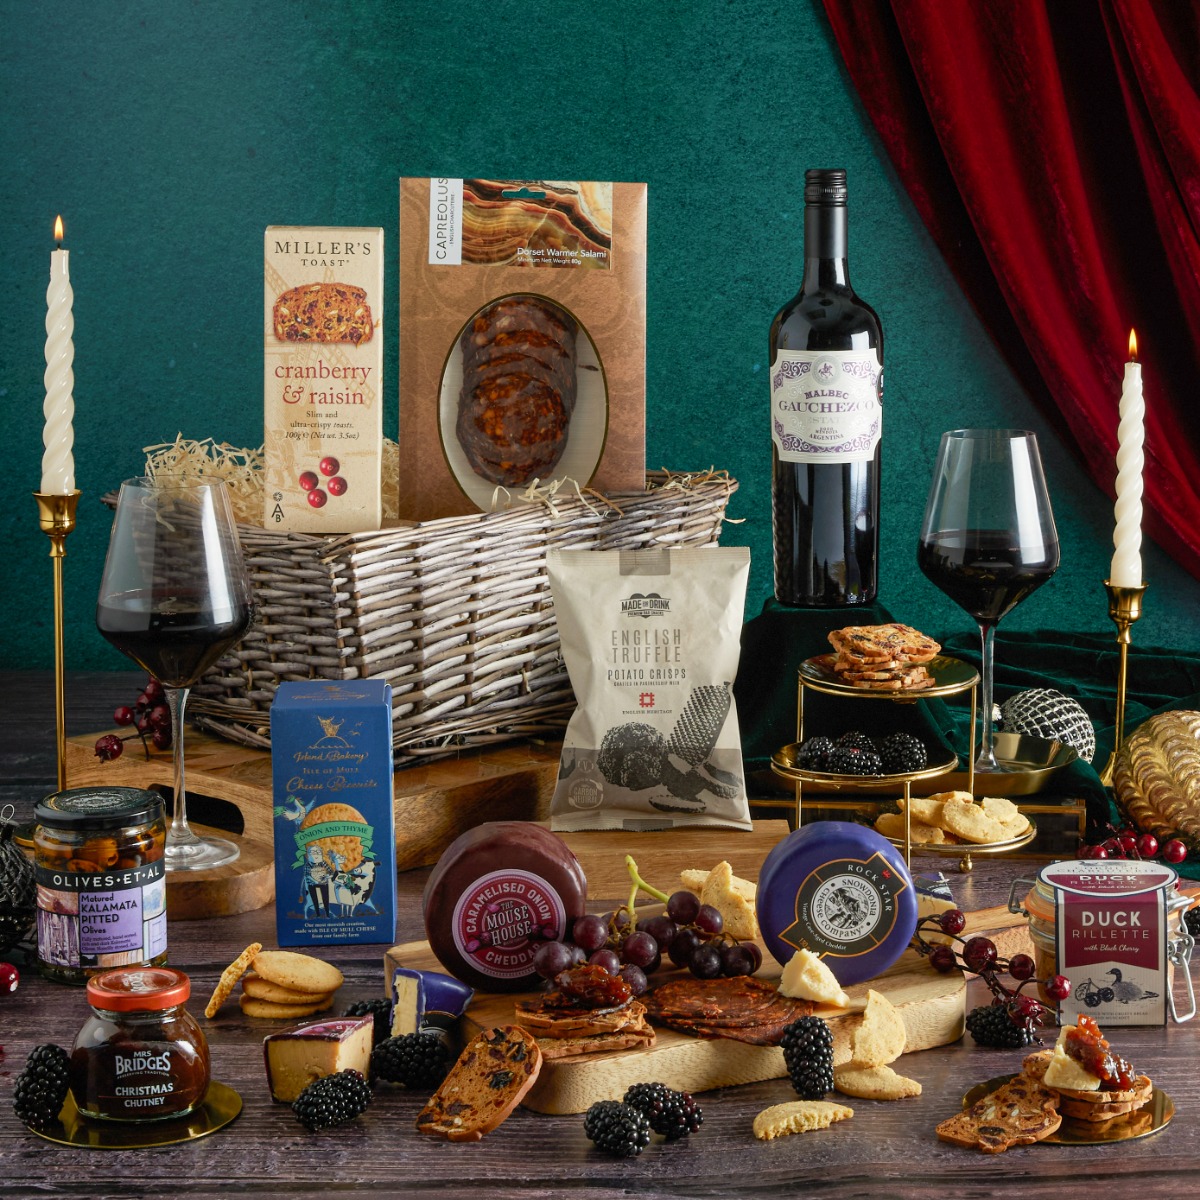 Christmas Eve Wine & Nibbles Gift Basket Luxury Christmas Gift Hampers Free UK Delivery Hampers.com